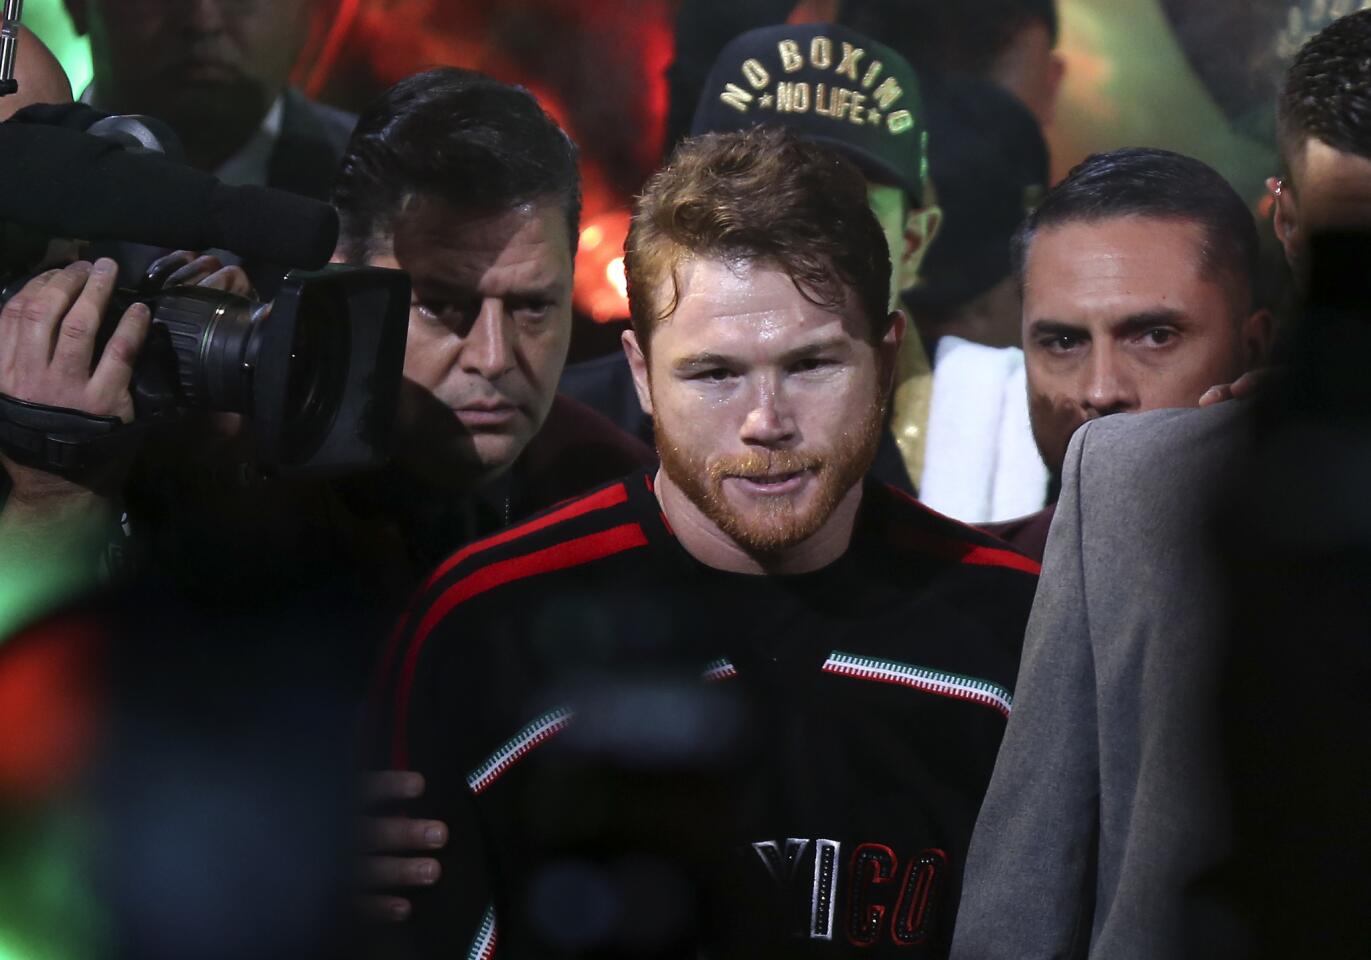 Canelo Alvarez enters T-Mobile arena for a middleweight title boxing match against Gennady Golovkin, Saturday, Sept. 15, 2018, in Las Vegas.